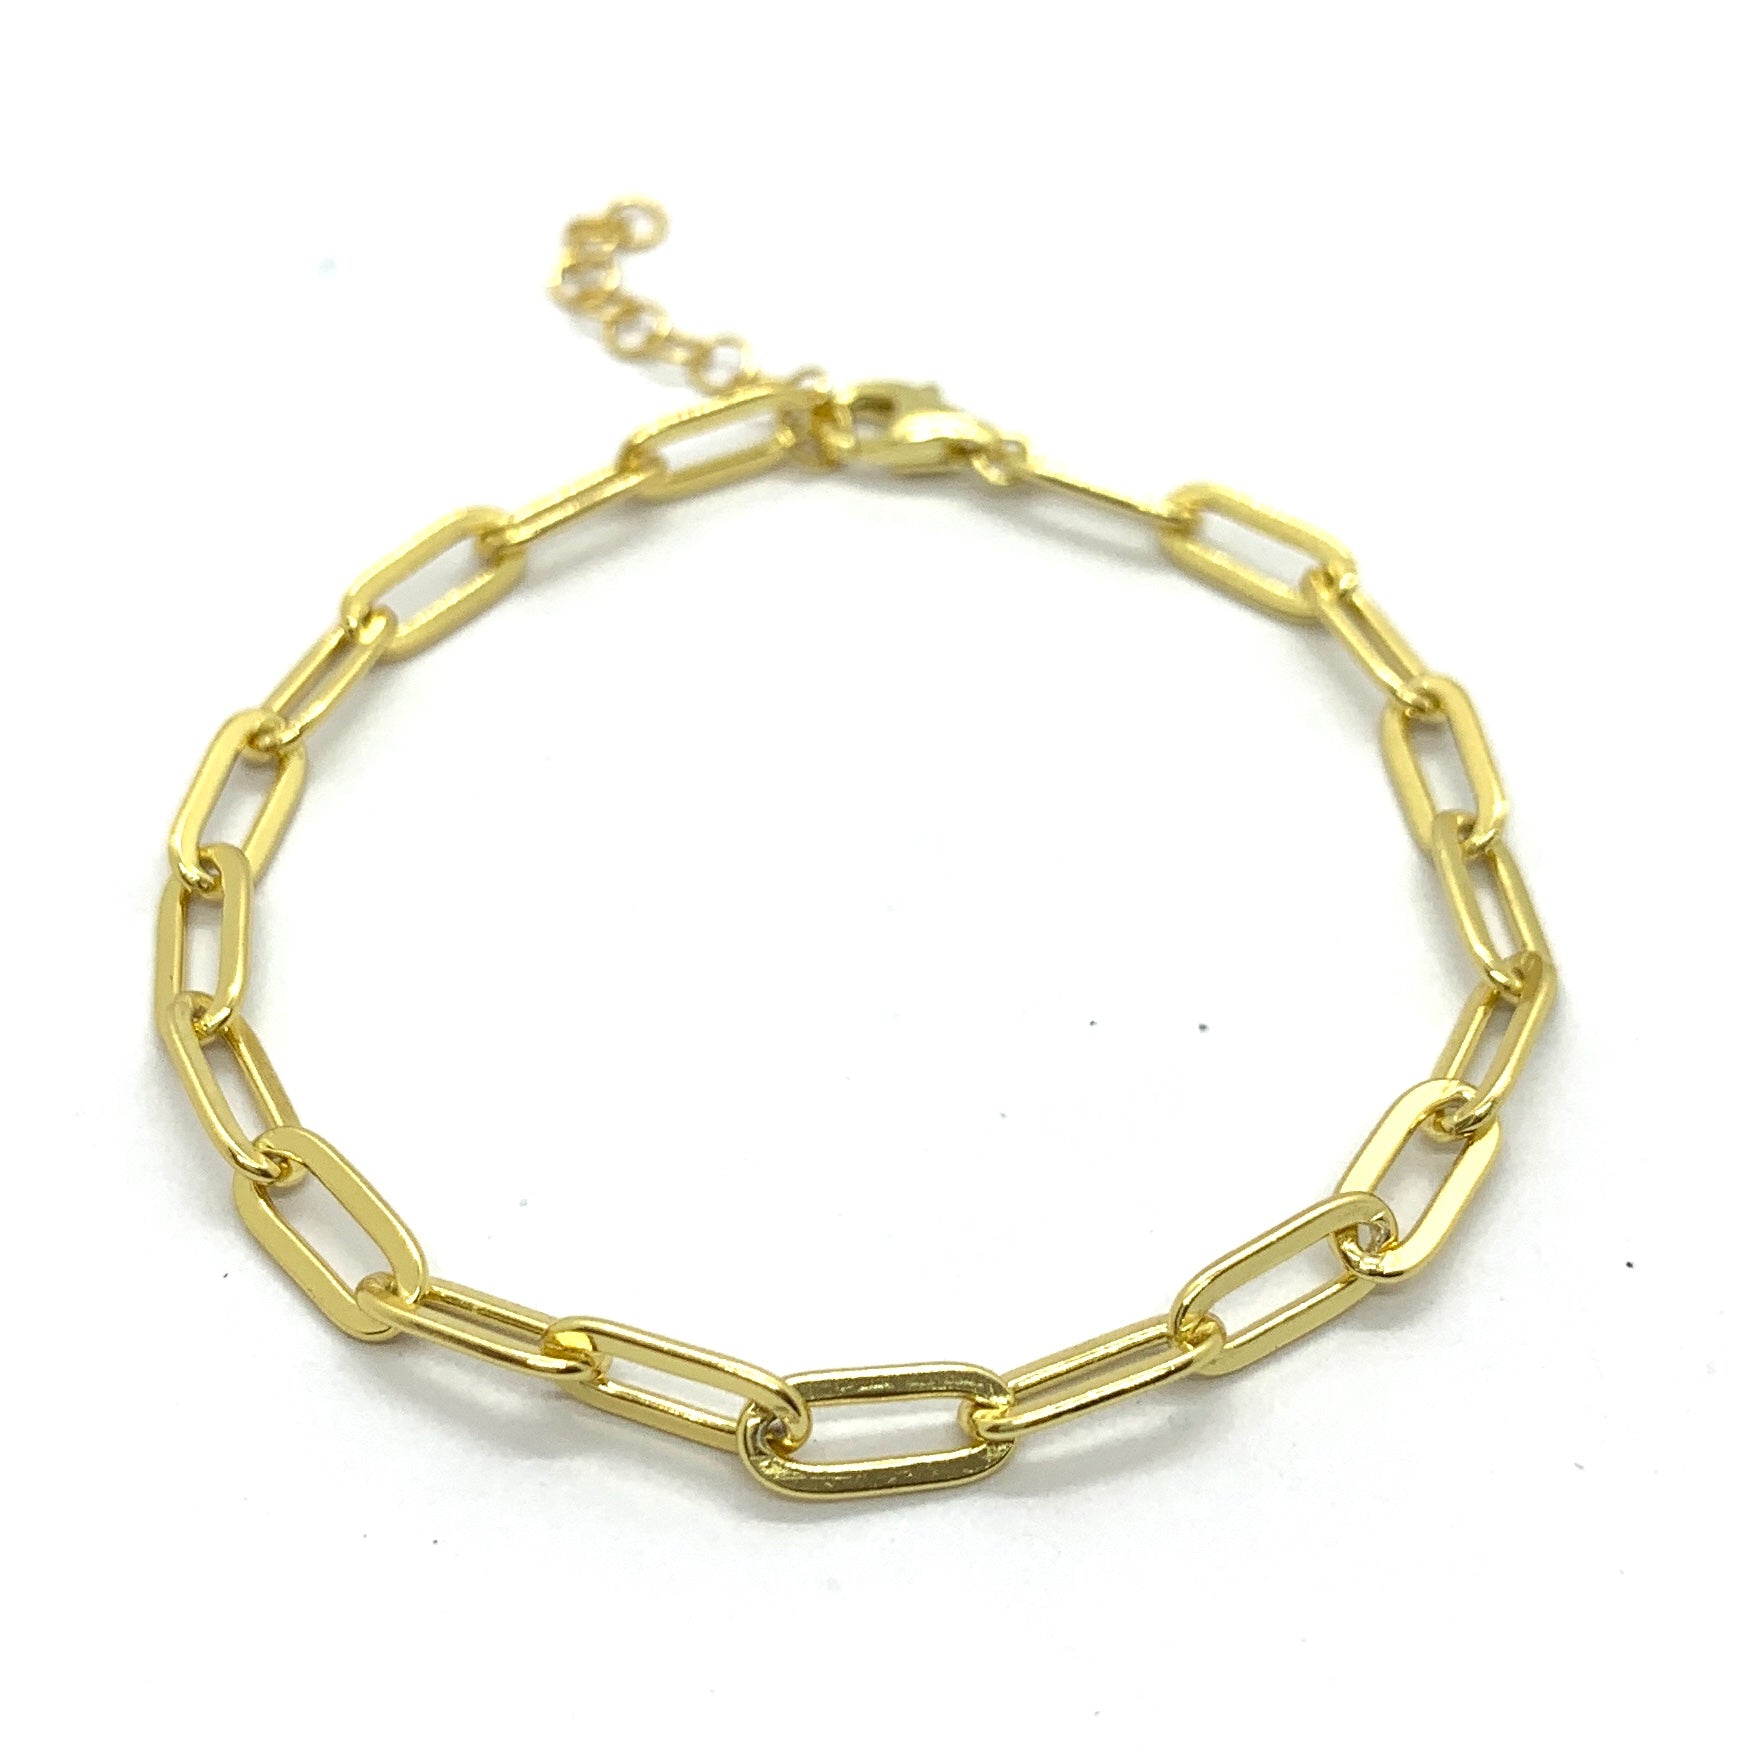 THE MAKERY WATCH CHAIN BRACELET GOLD PLATED BRASS 7"+1"